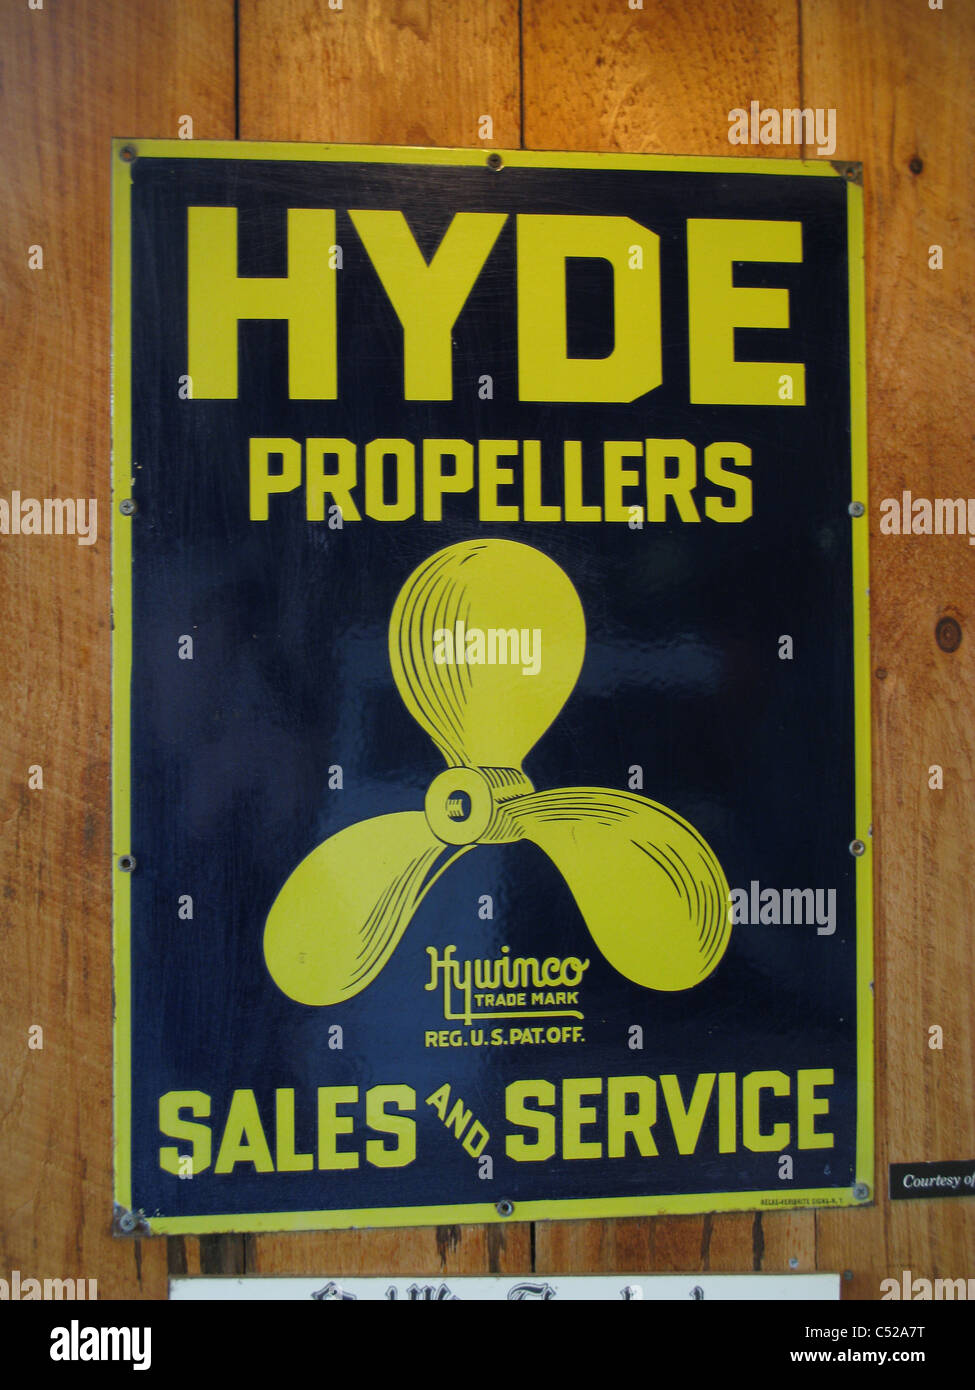 Hyde propellers sales and service Stock Photo